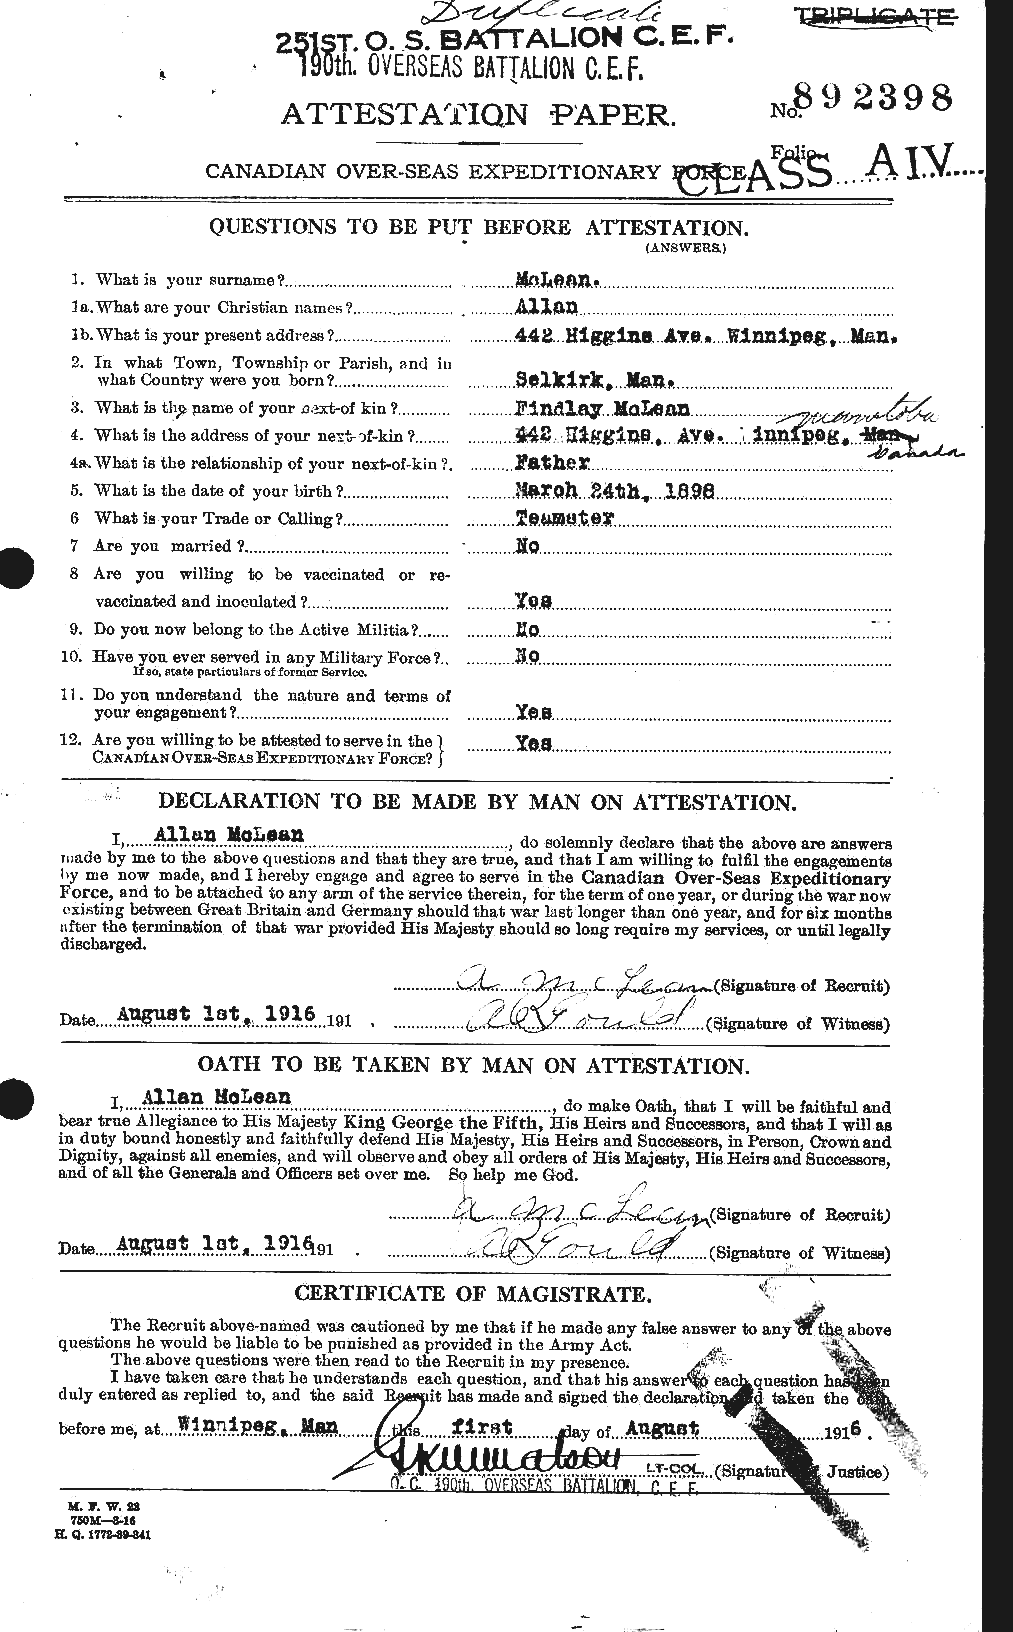 Personnel Records of the First World War - CEF 532775a